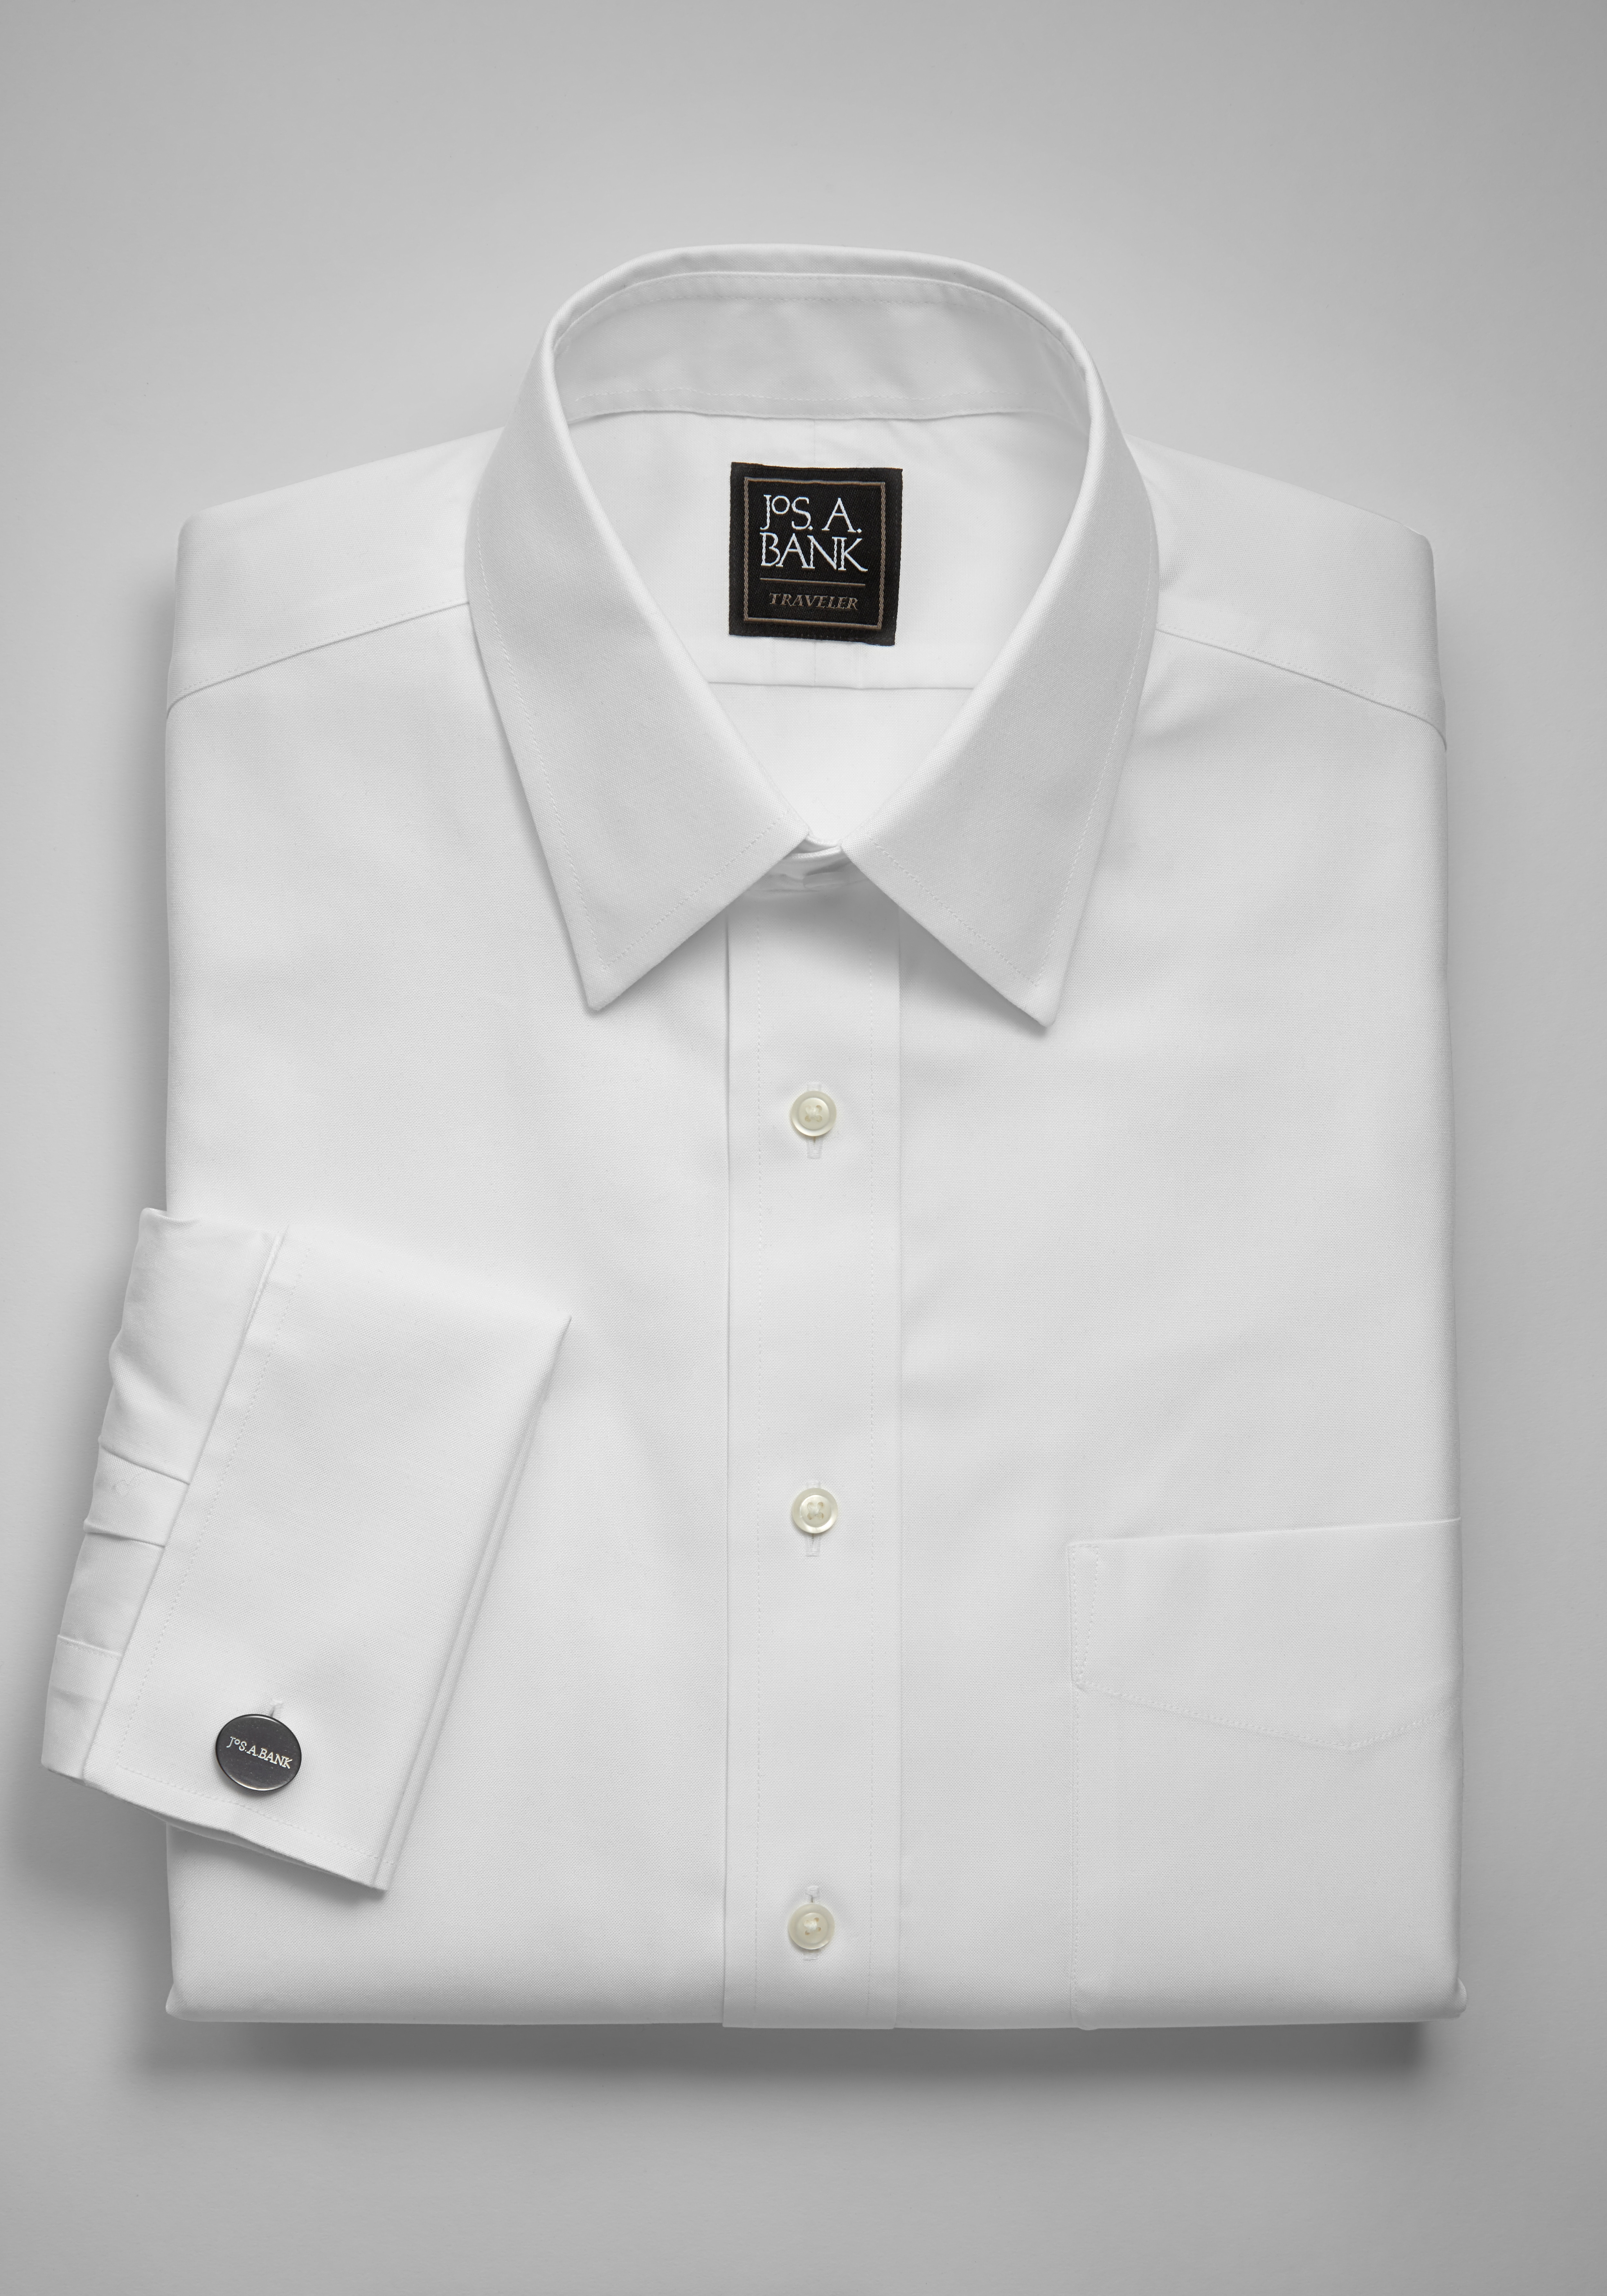 French Cuff Shirts for Men